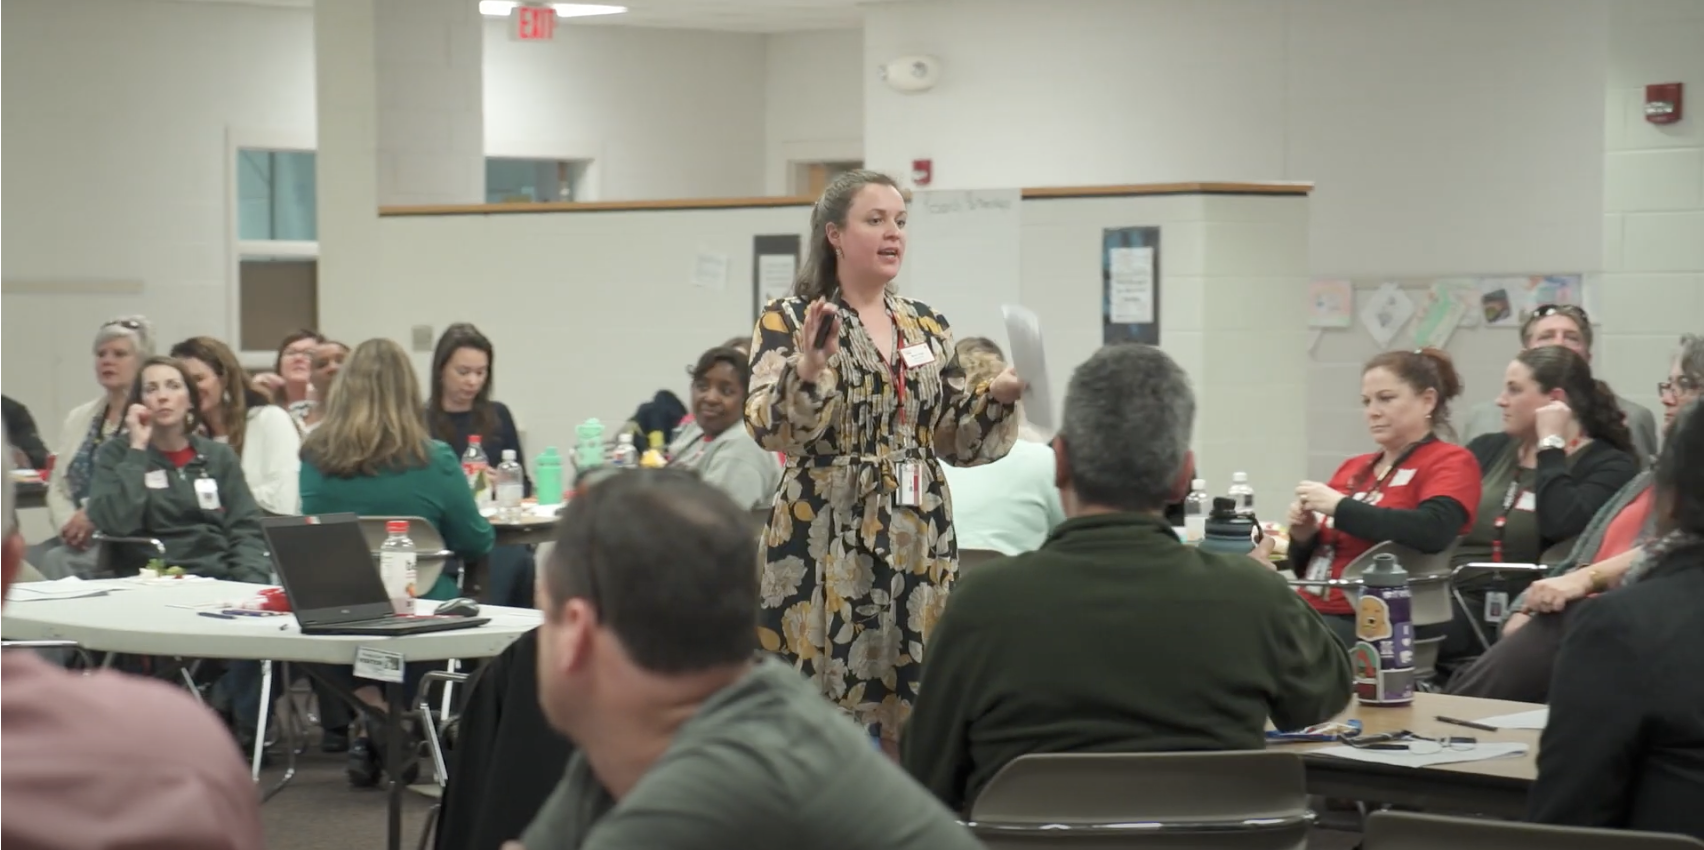 A woman speaks to a group of teachers sitting at tables situated around the room